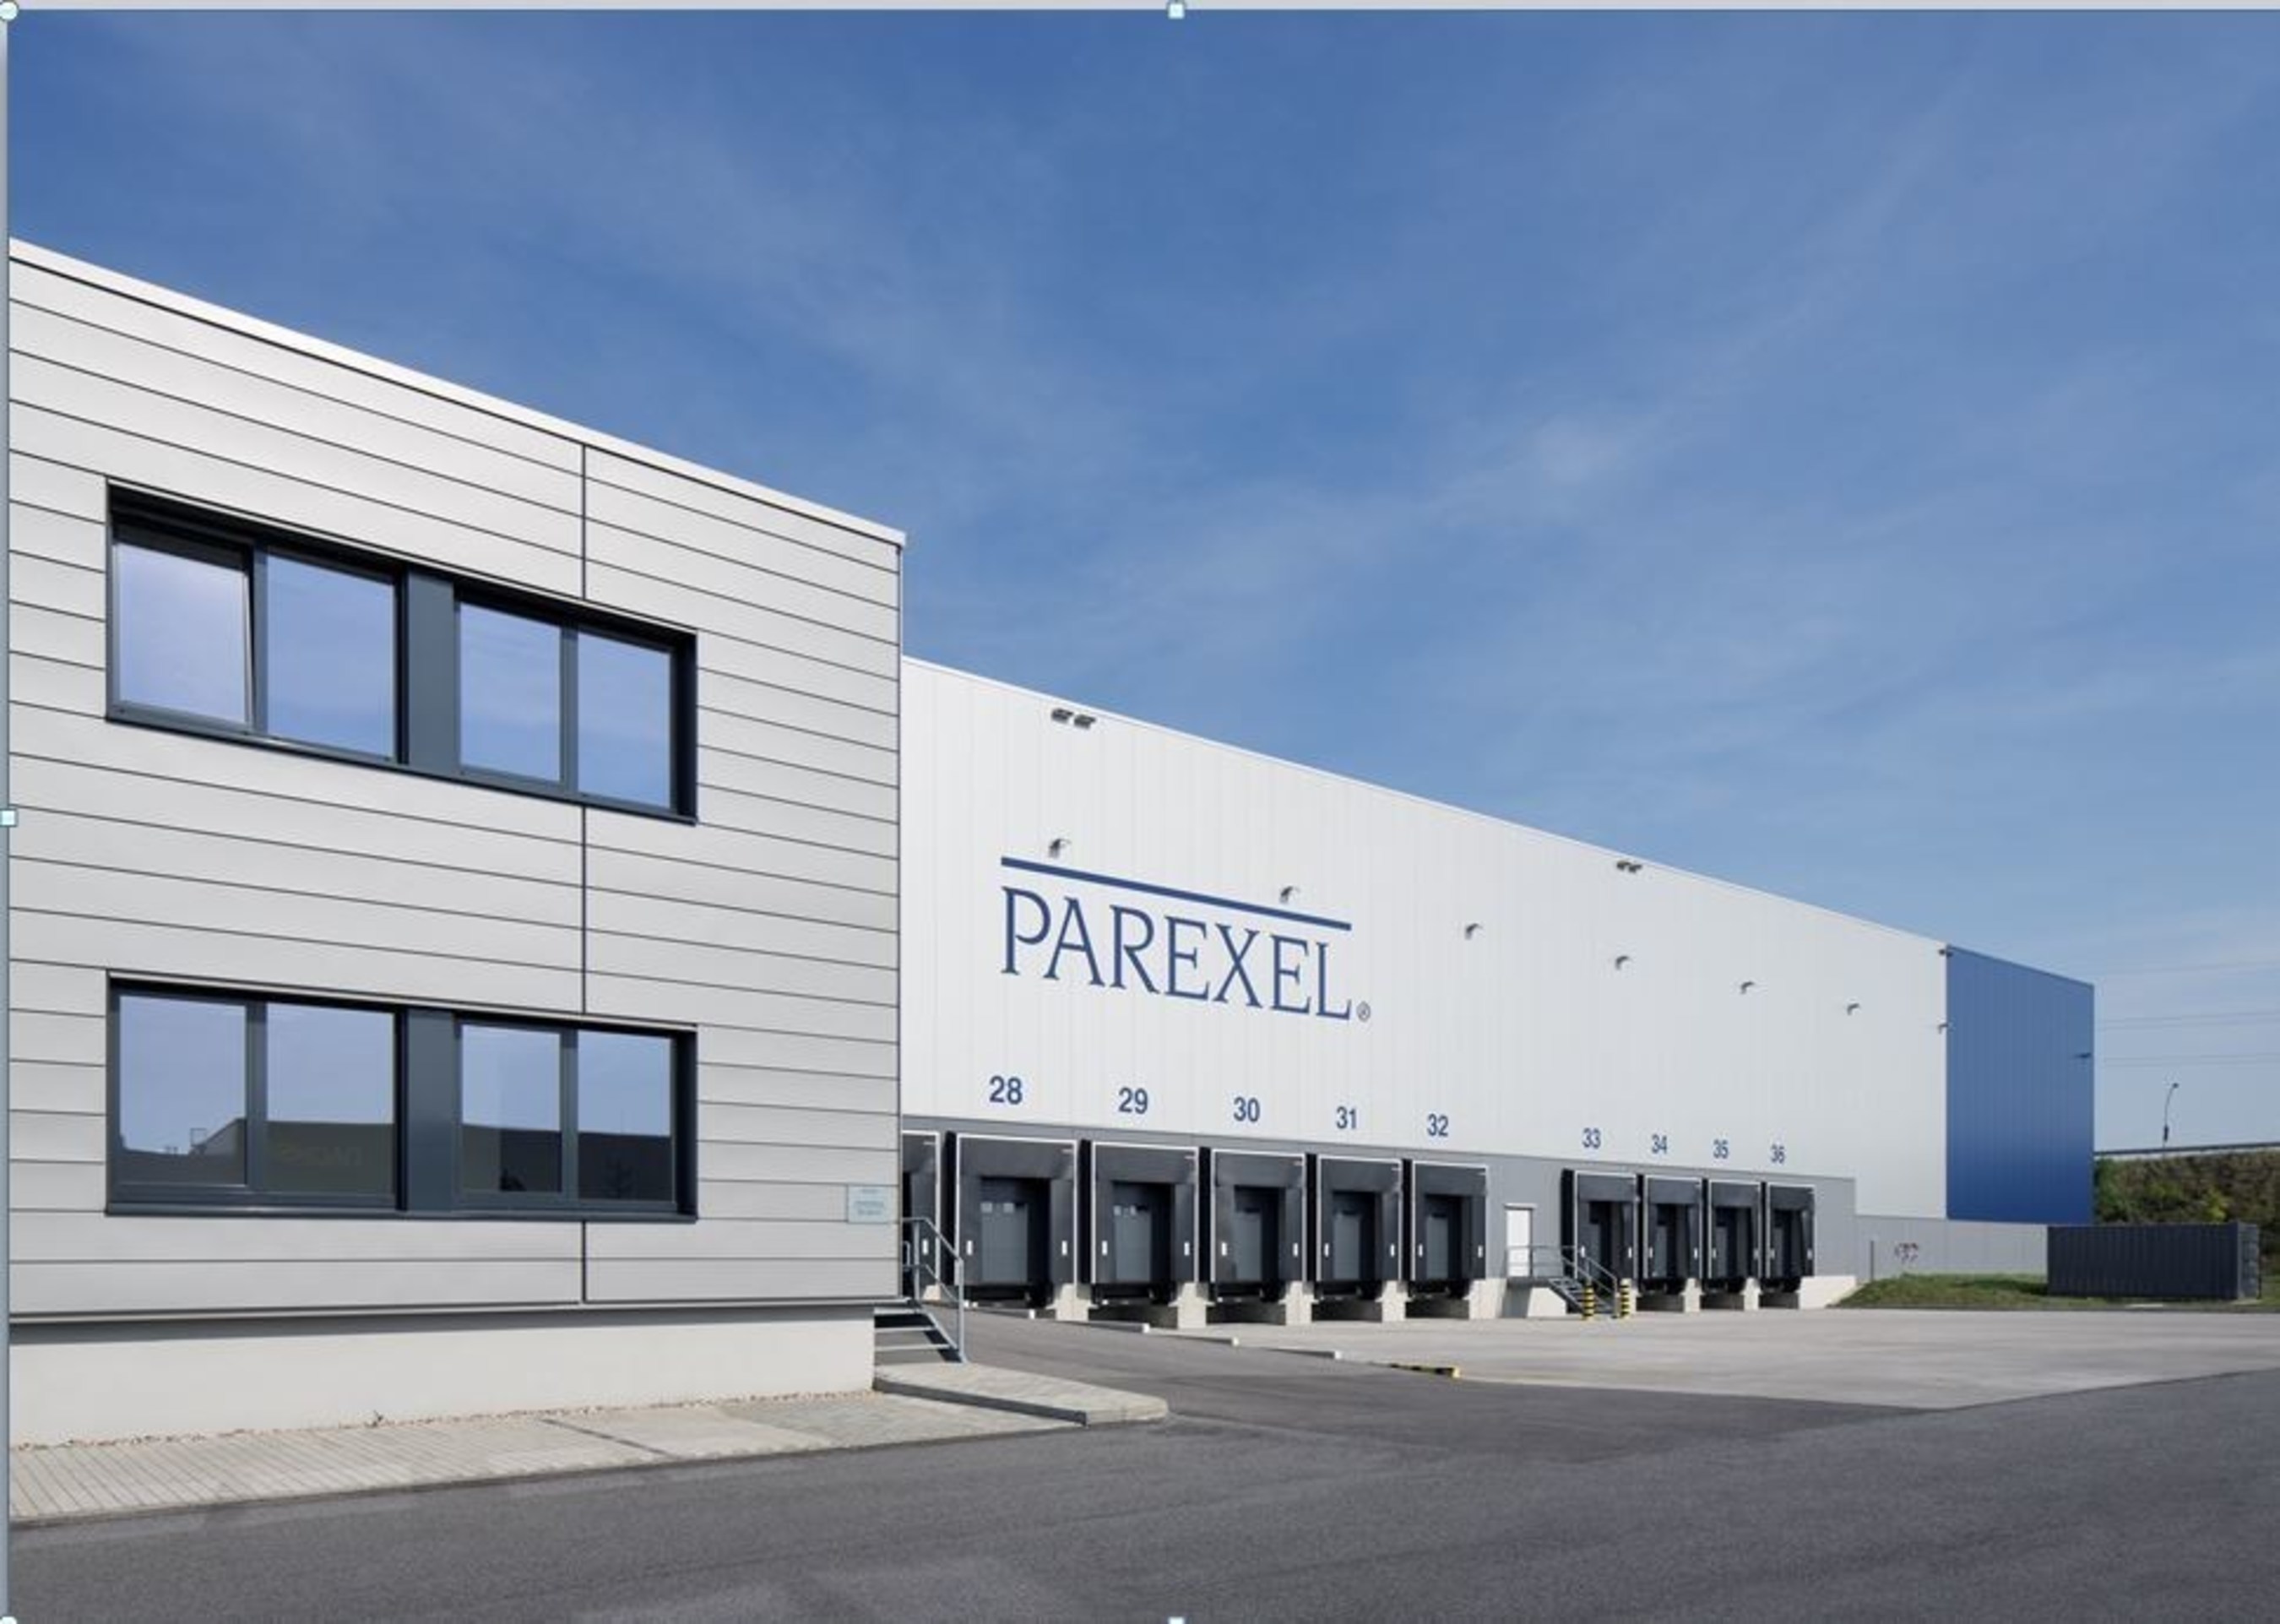 PAREXEL's new Clinical Trial Supply Coordination Hub and Distribution Center in Berlin-Schonefeld, Germany